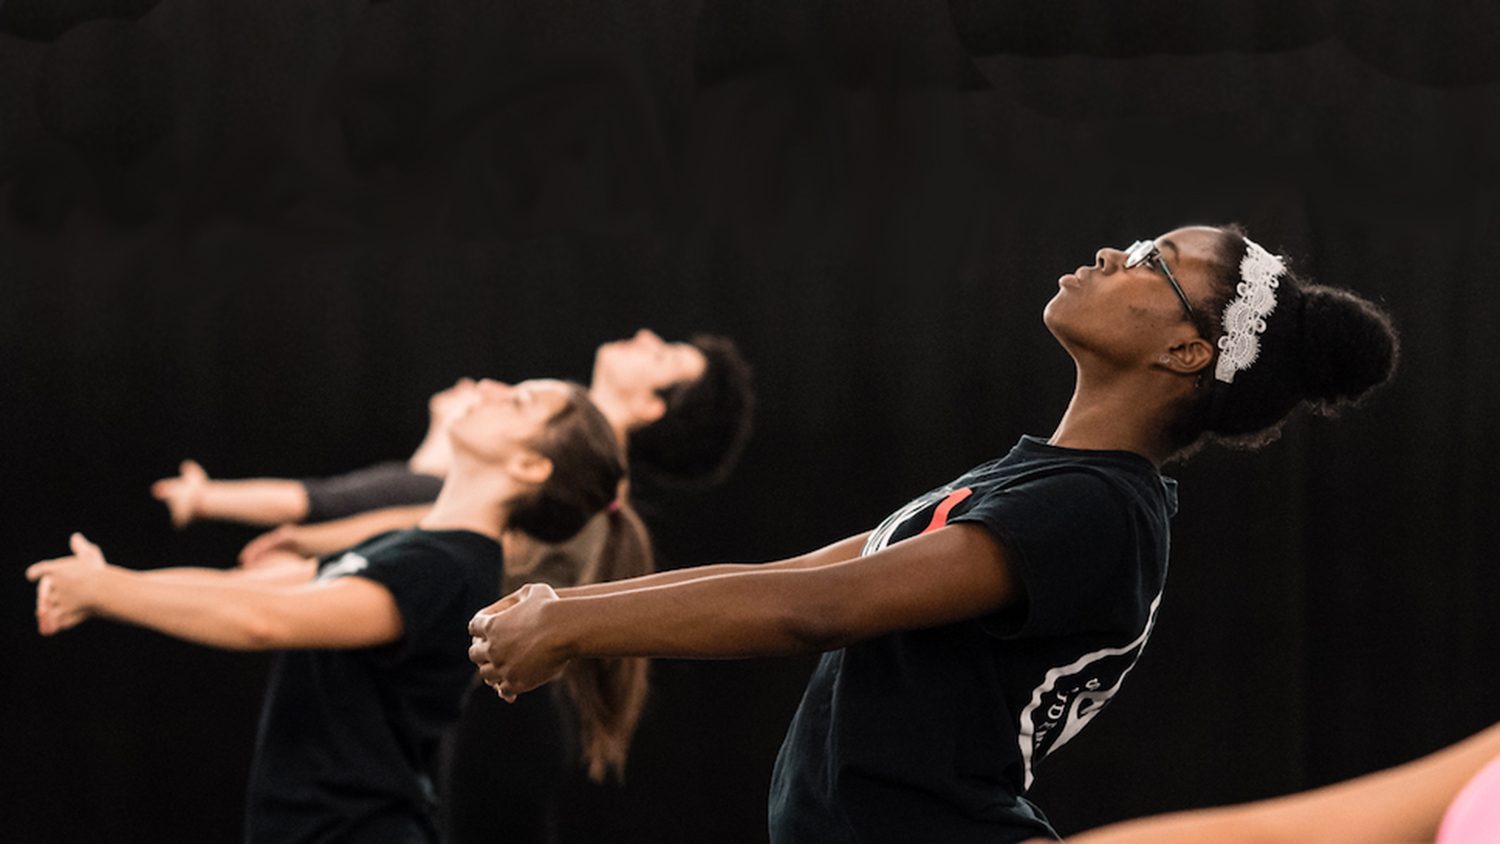 CALS student Dedreanna Scott is dancing with the NCSU Dance Company this Thursday